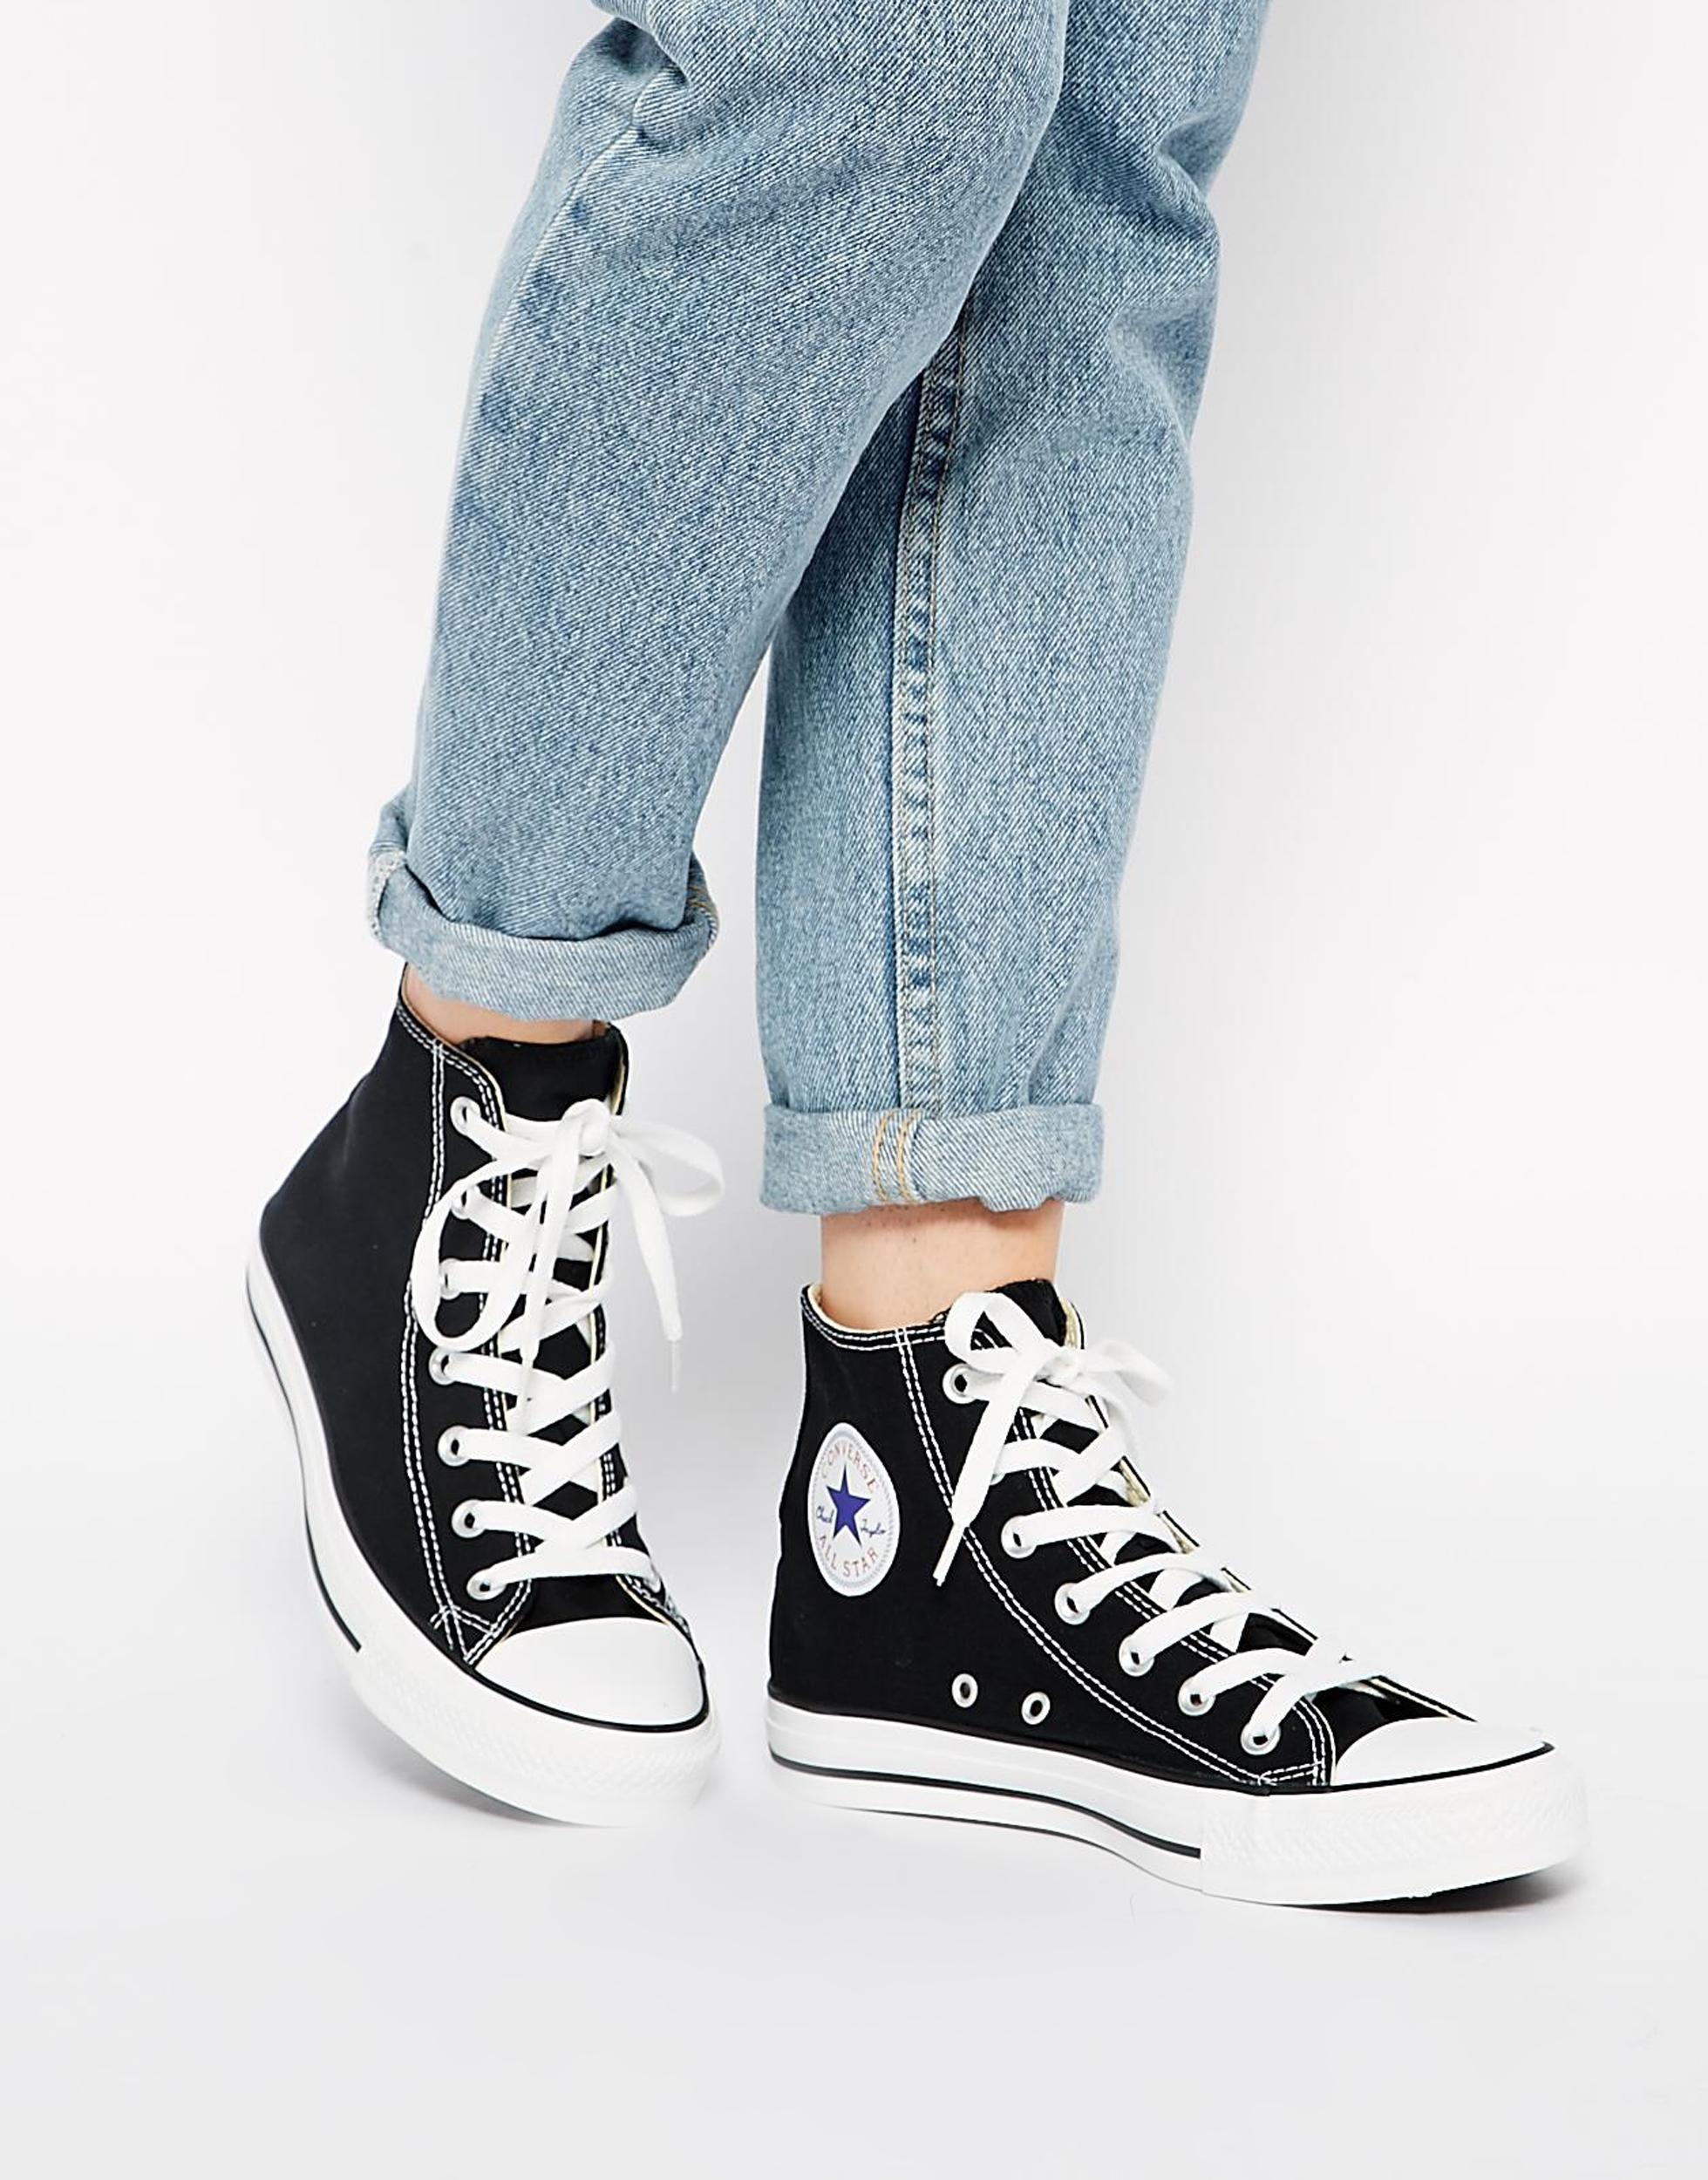 Converse All Star High Top Black Trainers - Lyst